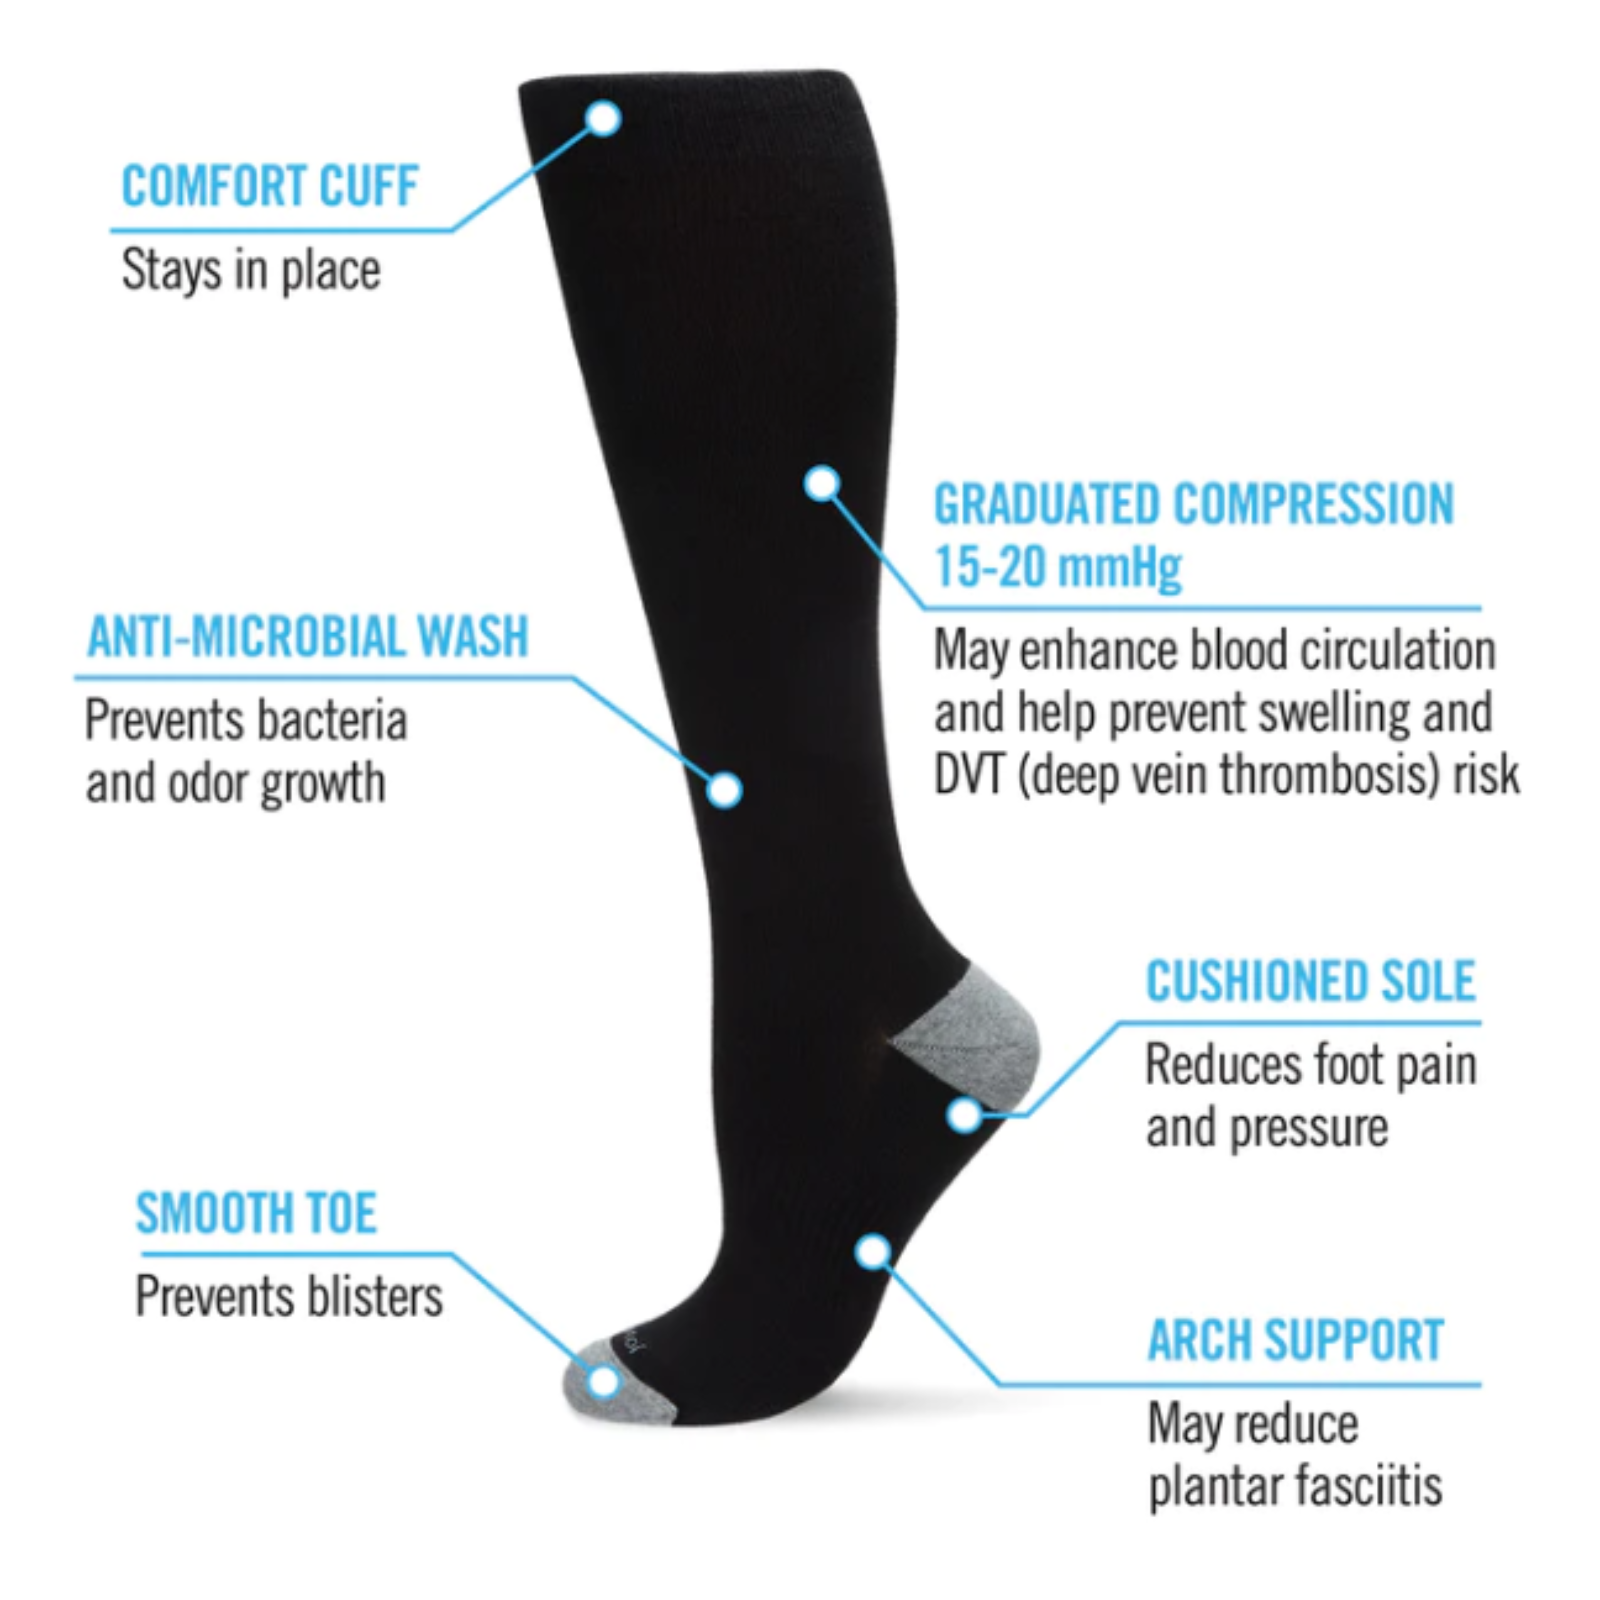 MeMoi Solid Cotton Moderate Graduated Compression (15-20mmHg) women's sock details in a diagram